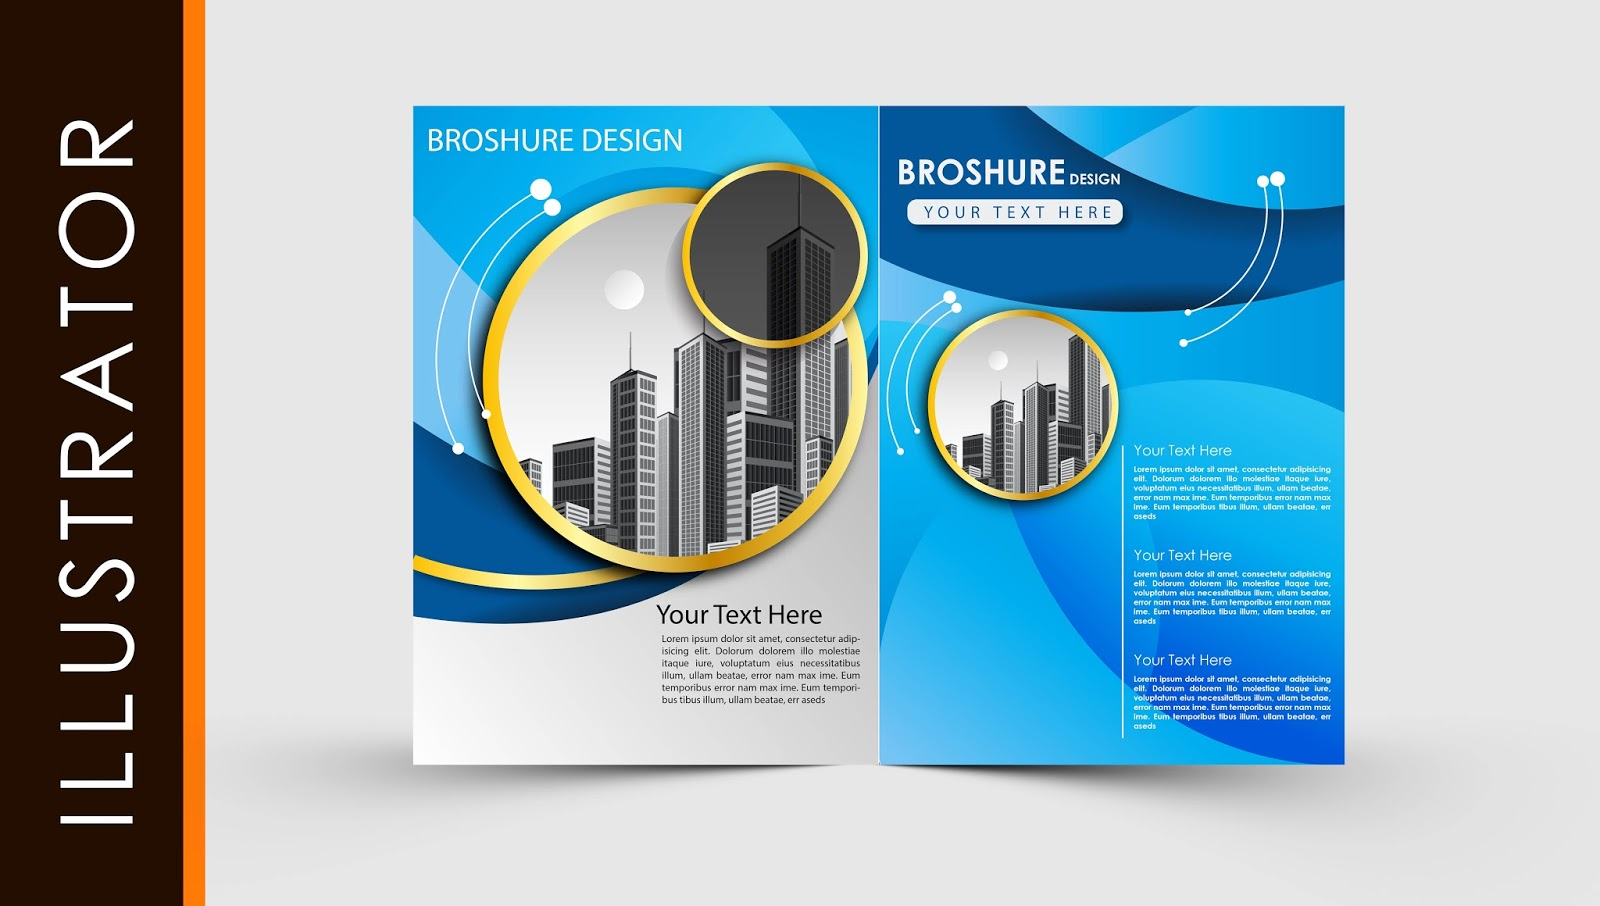 Free Download Adobe Illustrator Template Brochure Two Fold Intended For Illustrator Brochure Templates Free Download